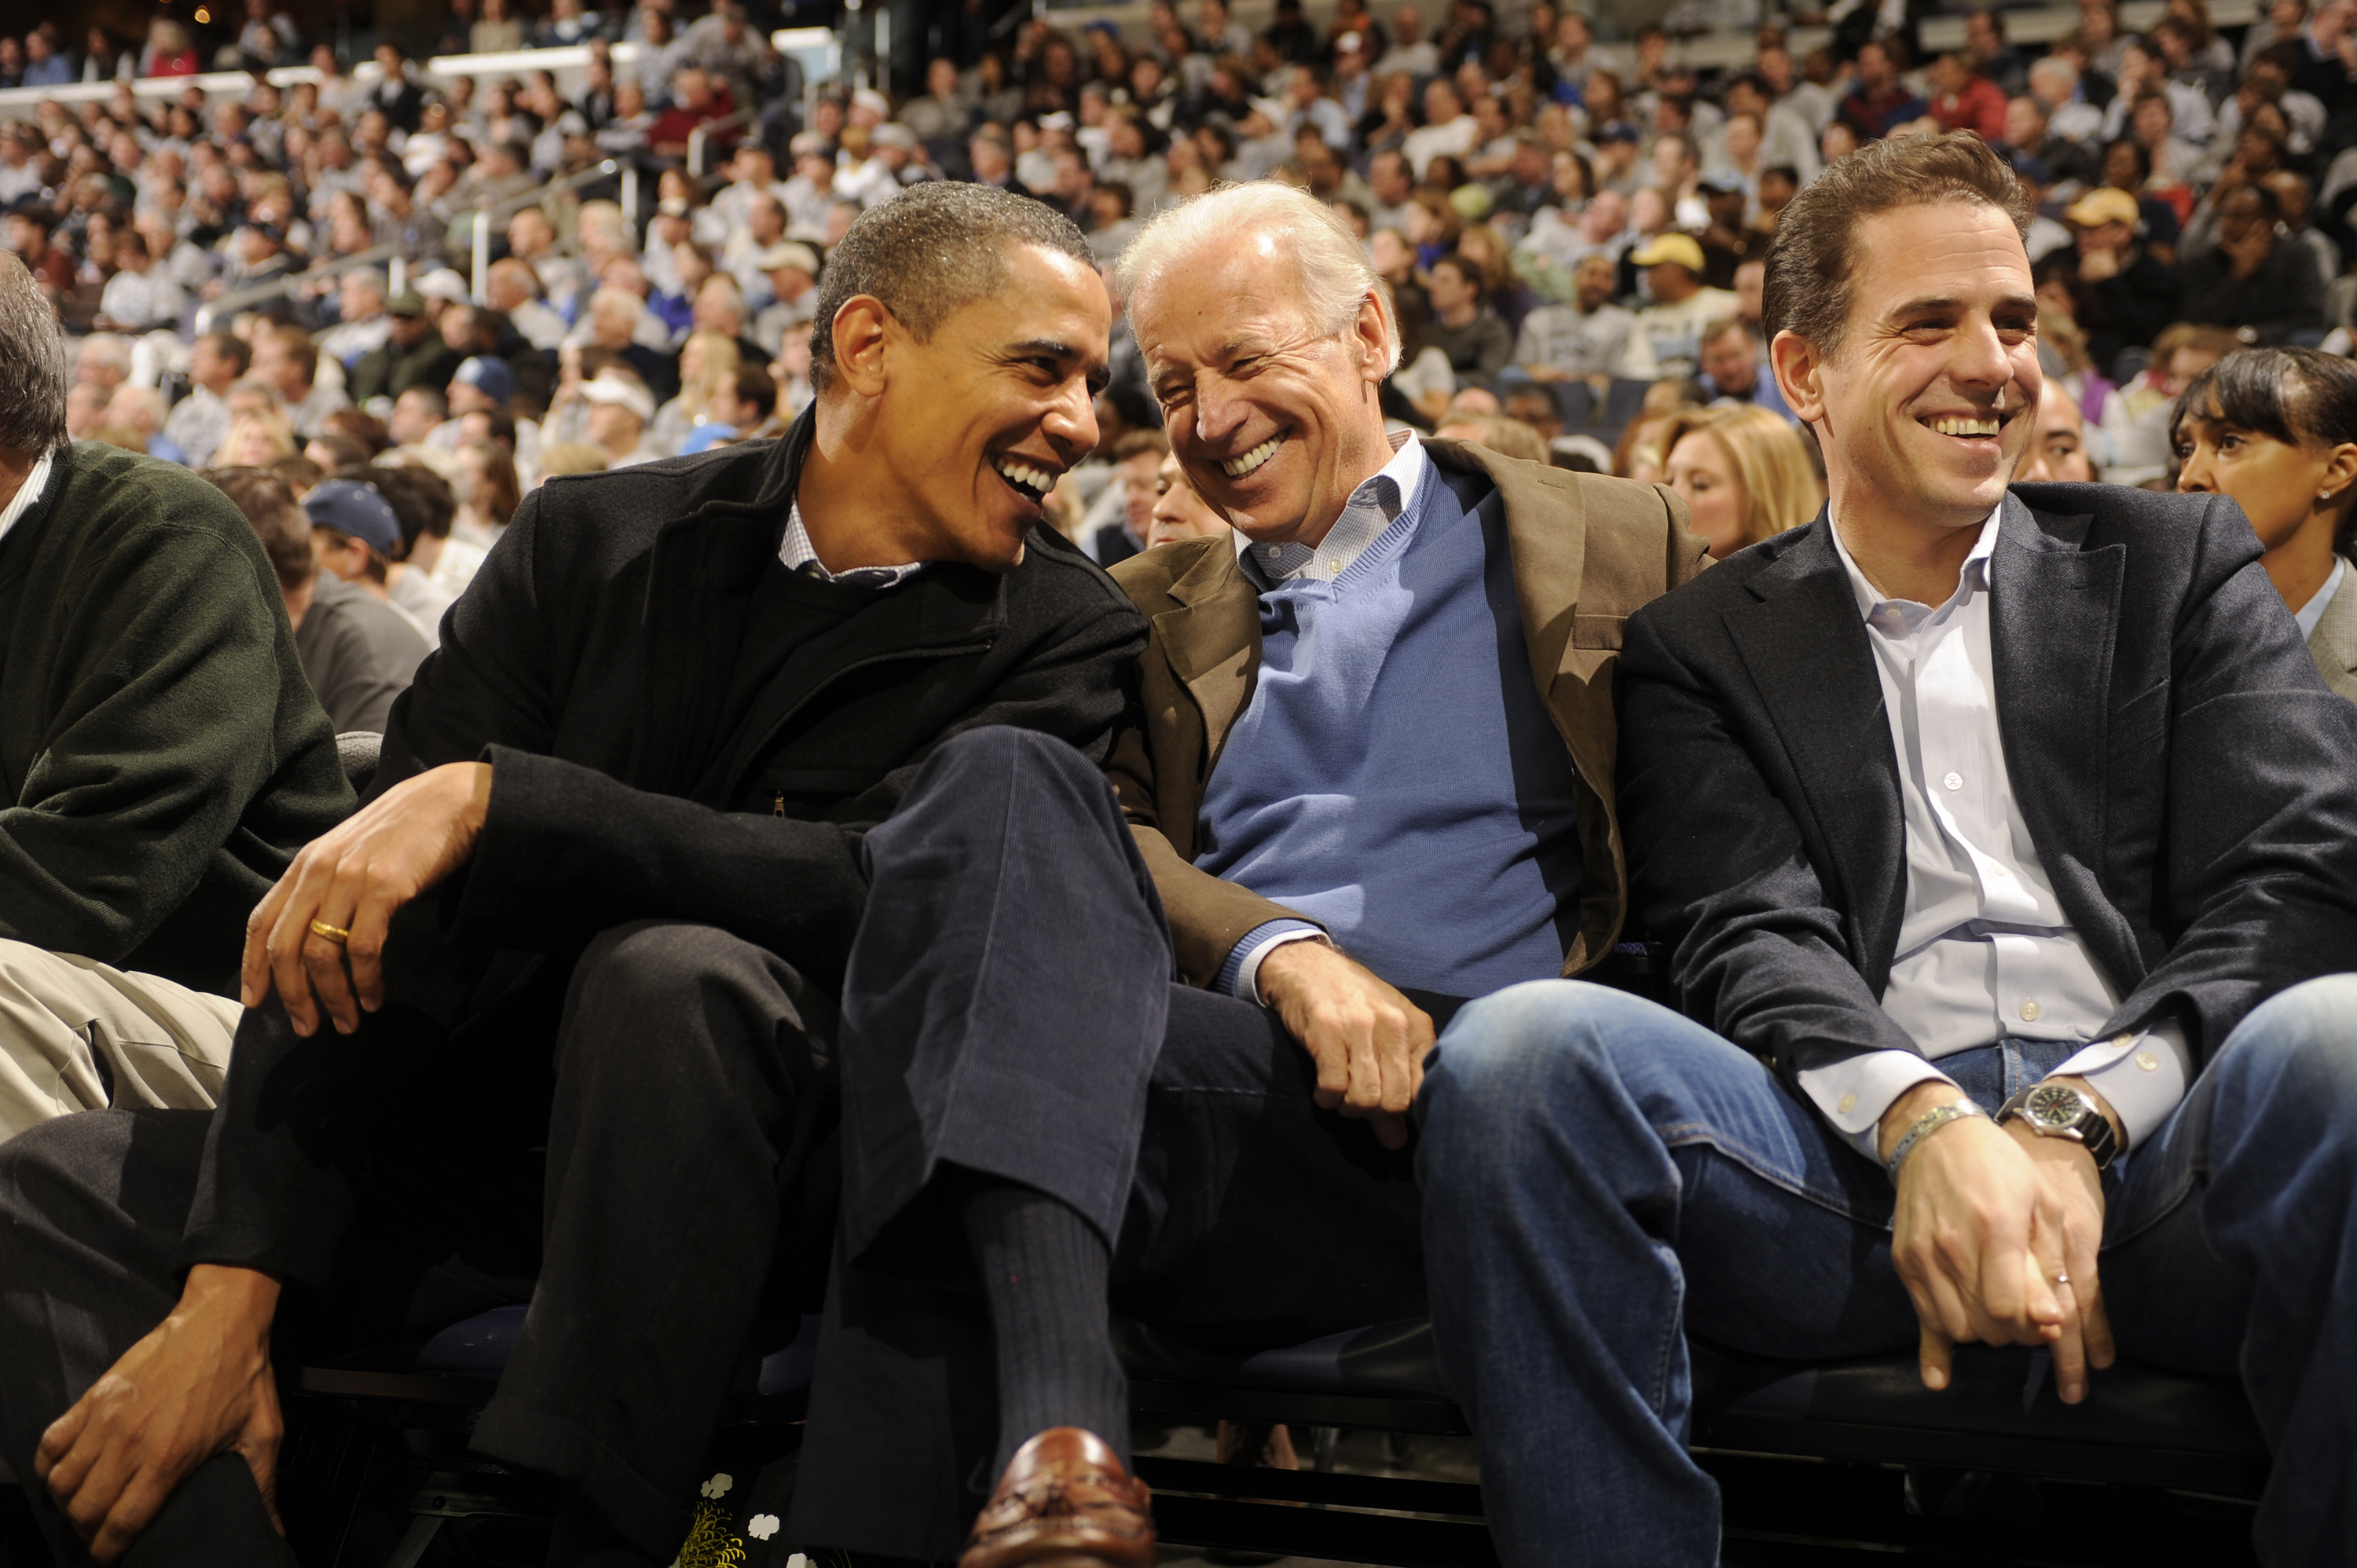 WASHINGTON - JANUARY 30: President of the United States Barack Obama and Vice President Joe Biden and Hunter Biden (son of Joe Biden) talk during a college basketball game between Georgetown Hoyas and the Duke Blue Devils on January 30, 2010 at the Verizon Center in Washington DC. (Photo by Mitchell Layton/Getty Images)